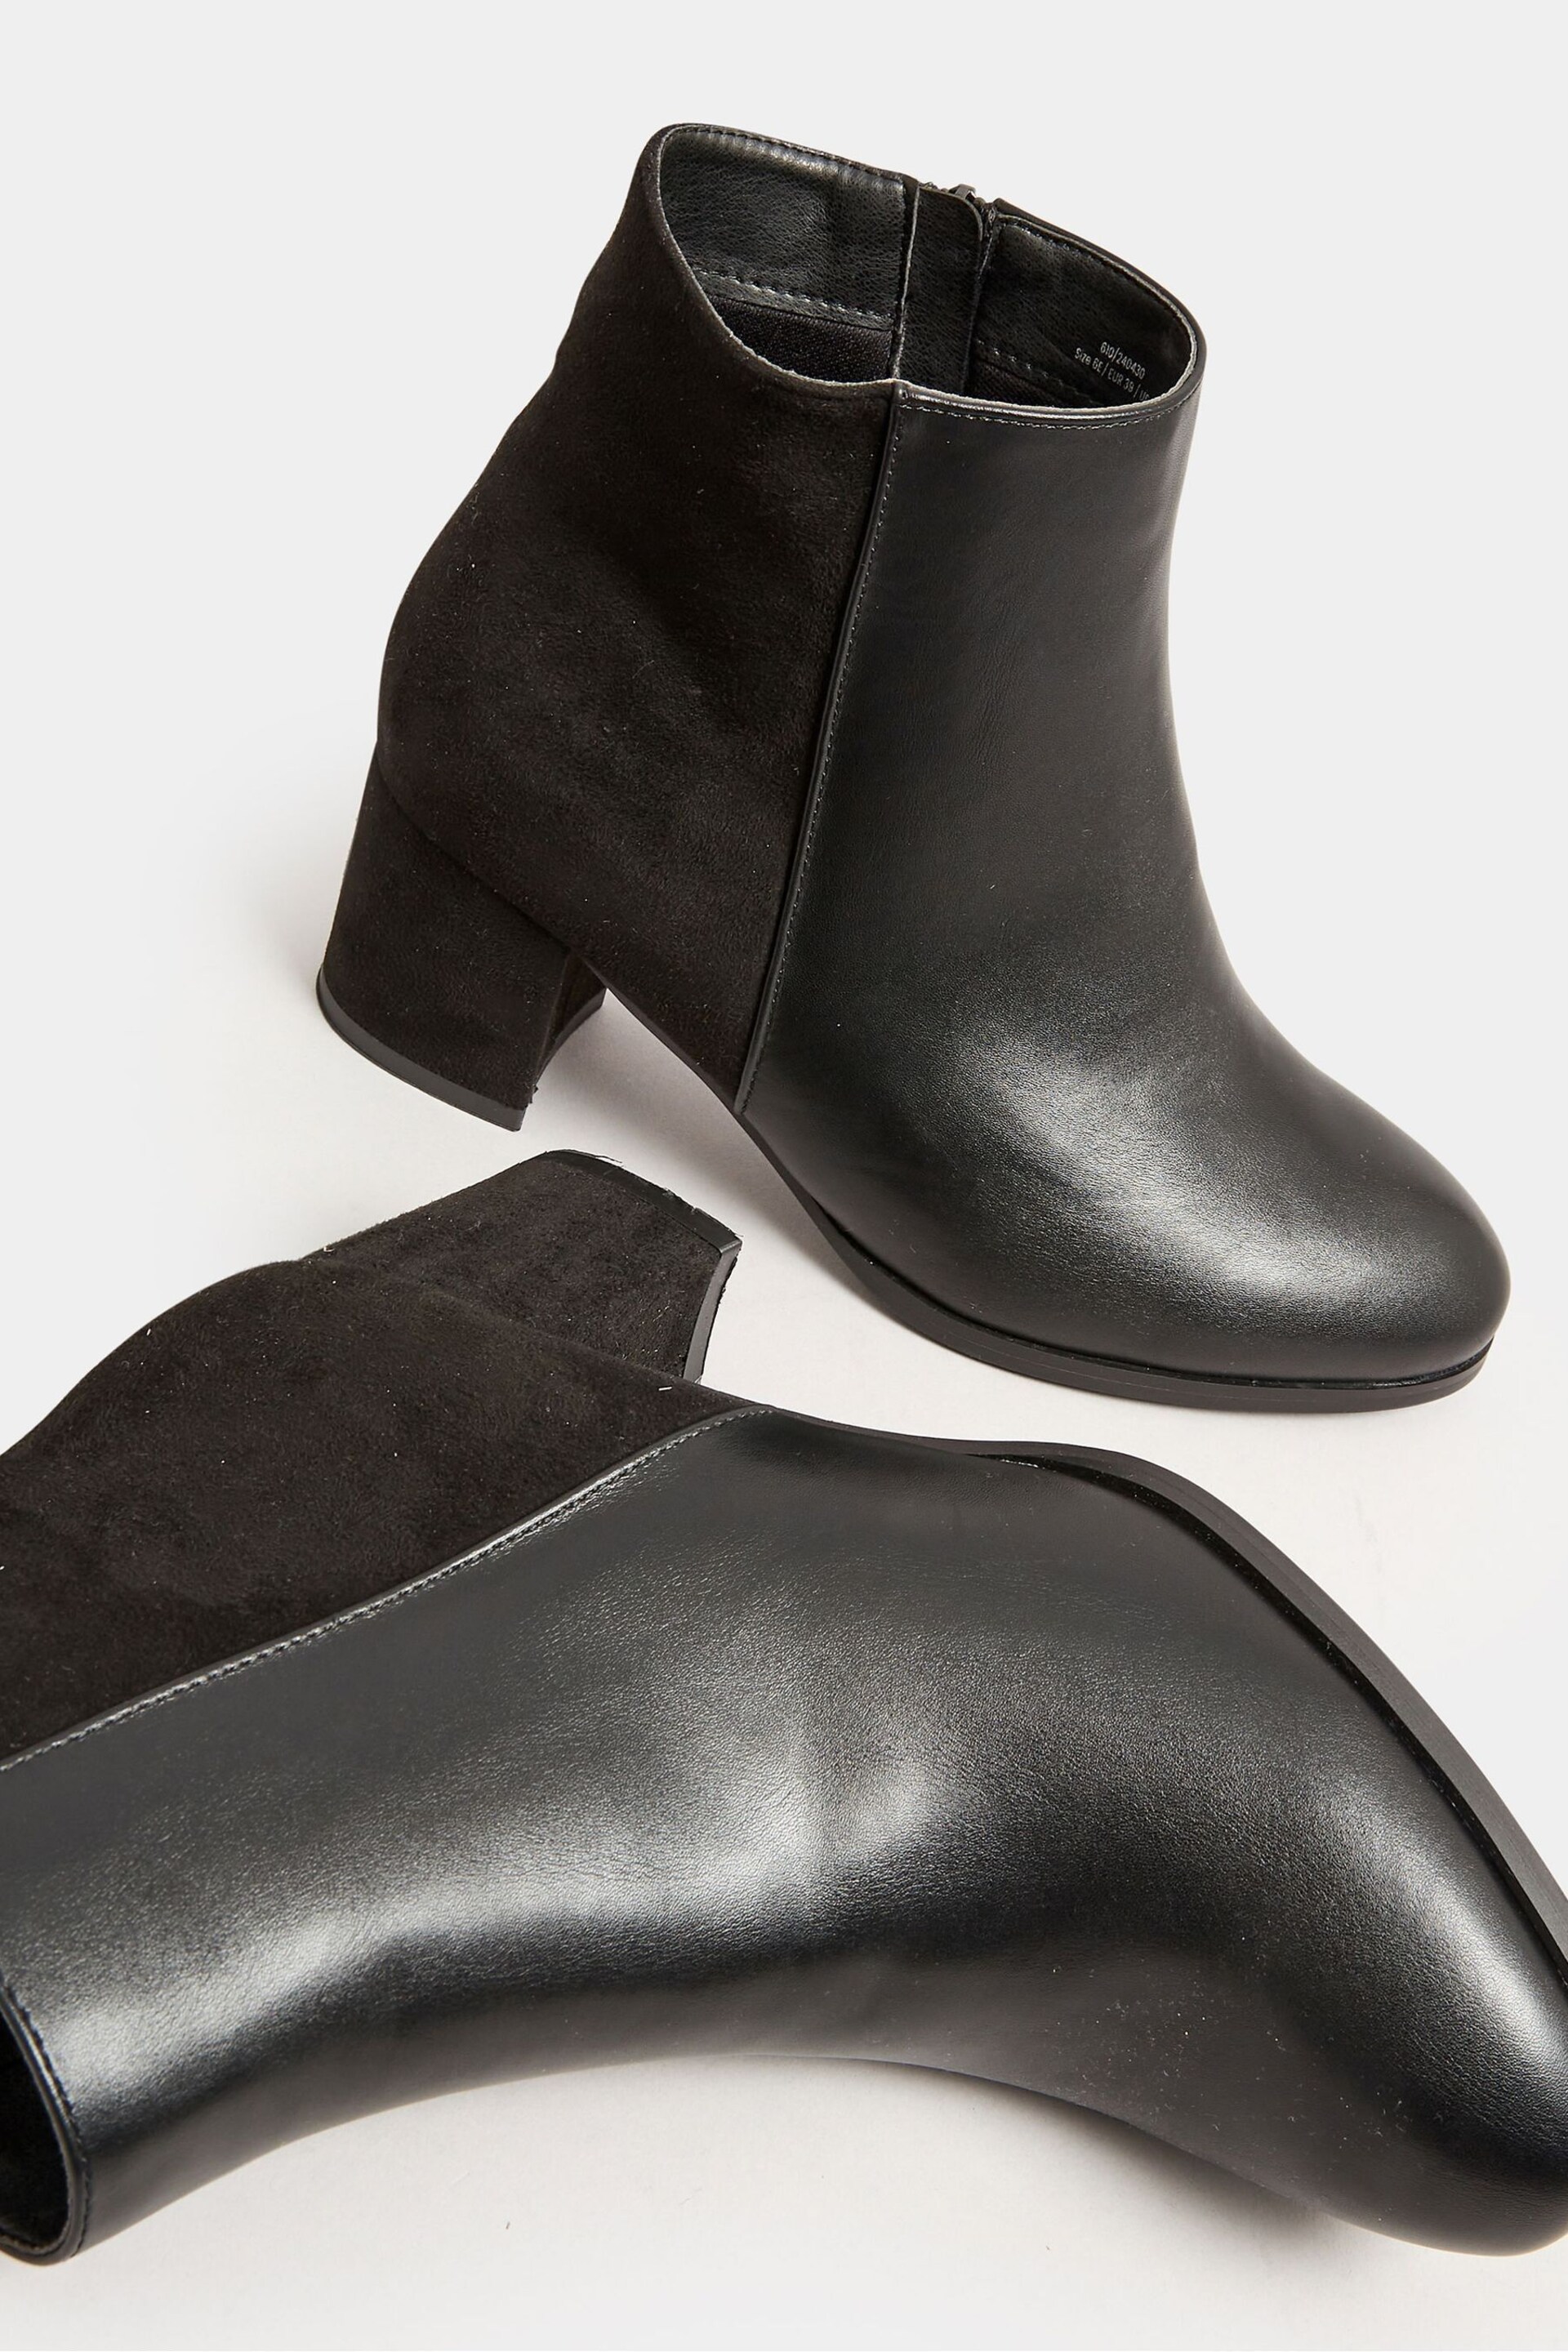 Yours Curve Black Extra Wide Fit Block Ankle PU Micro Boots - Image 4 of 4